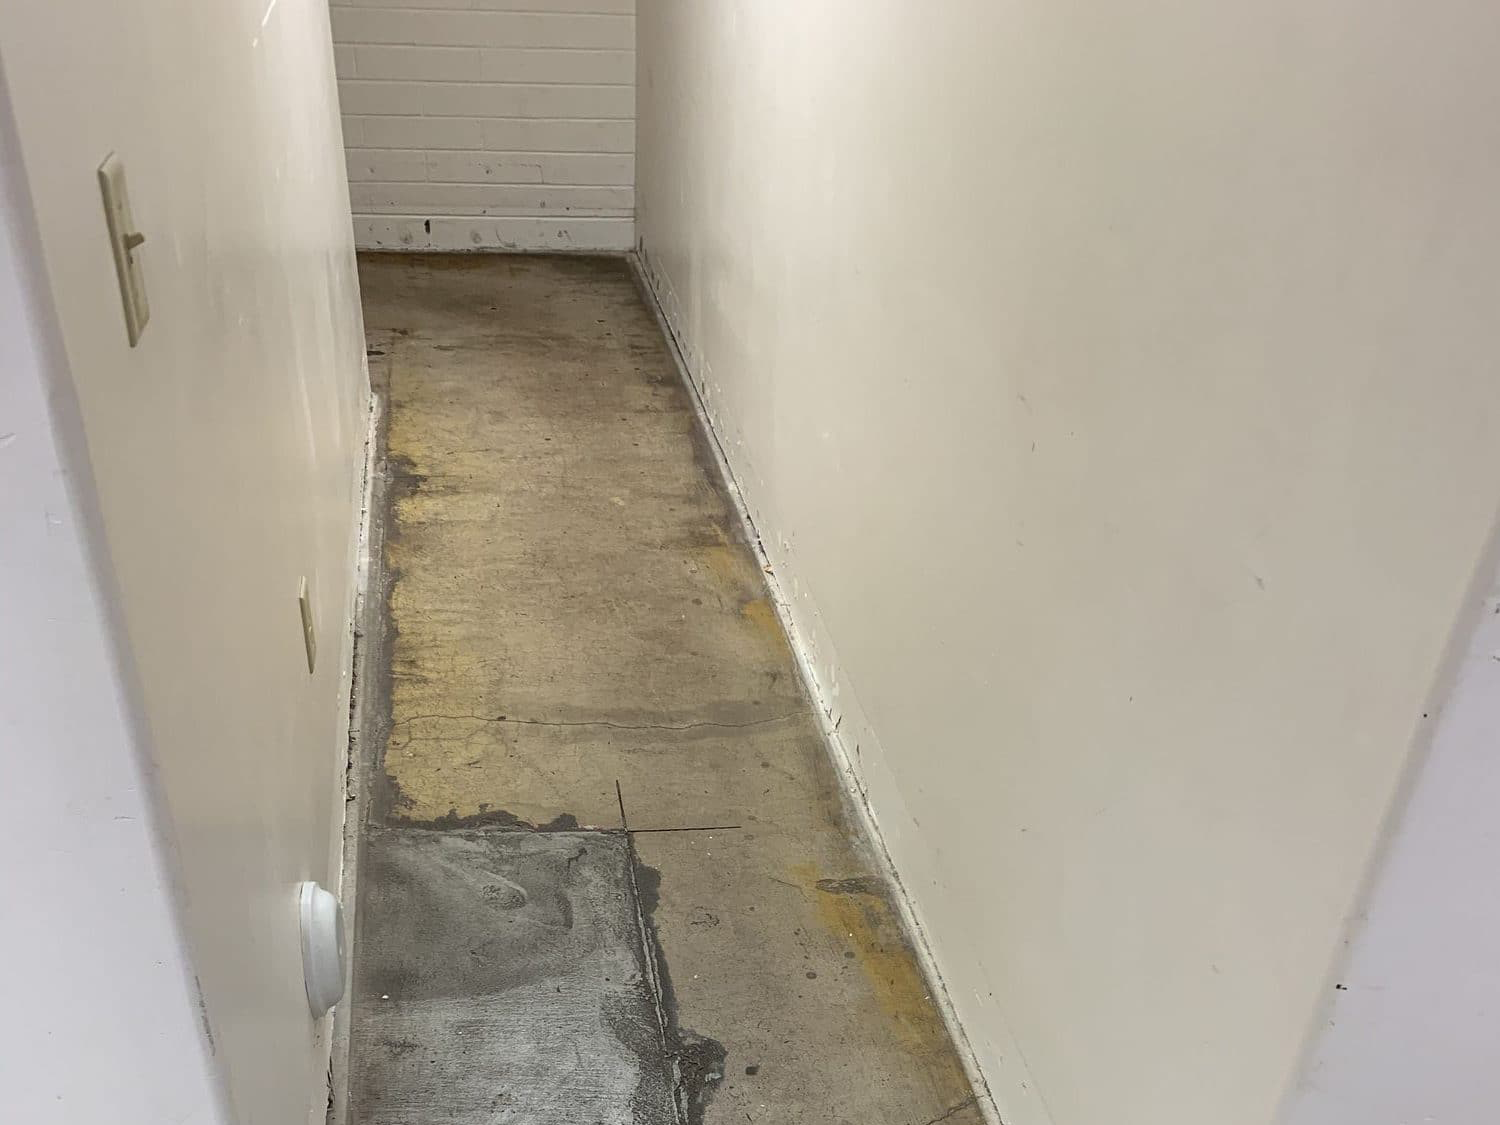 A before photo of a rugged-looking concrete floor in a white basement.